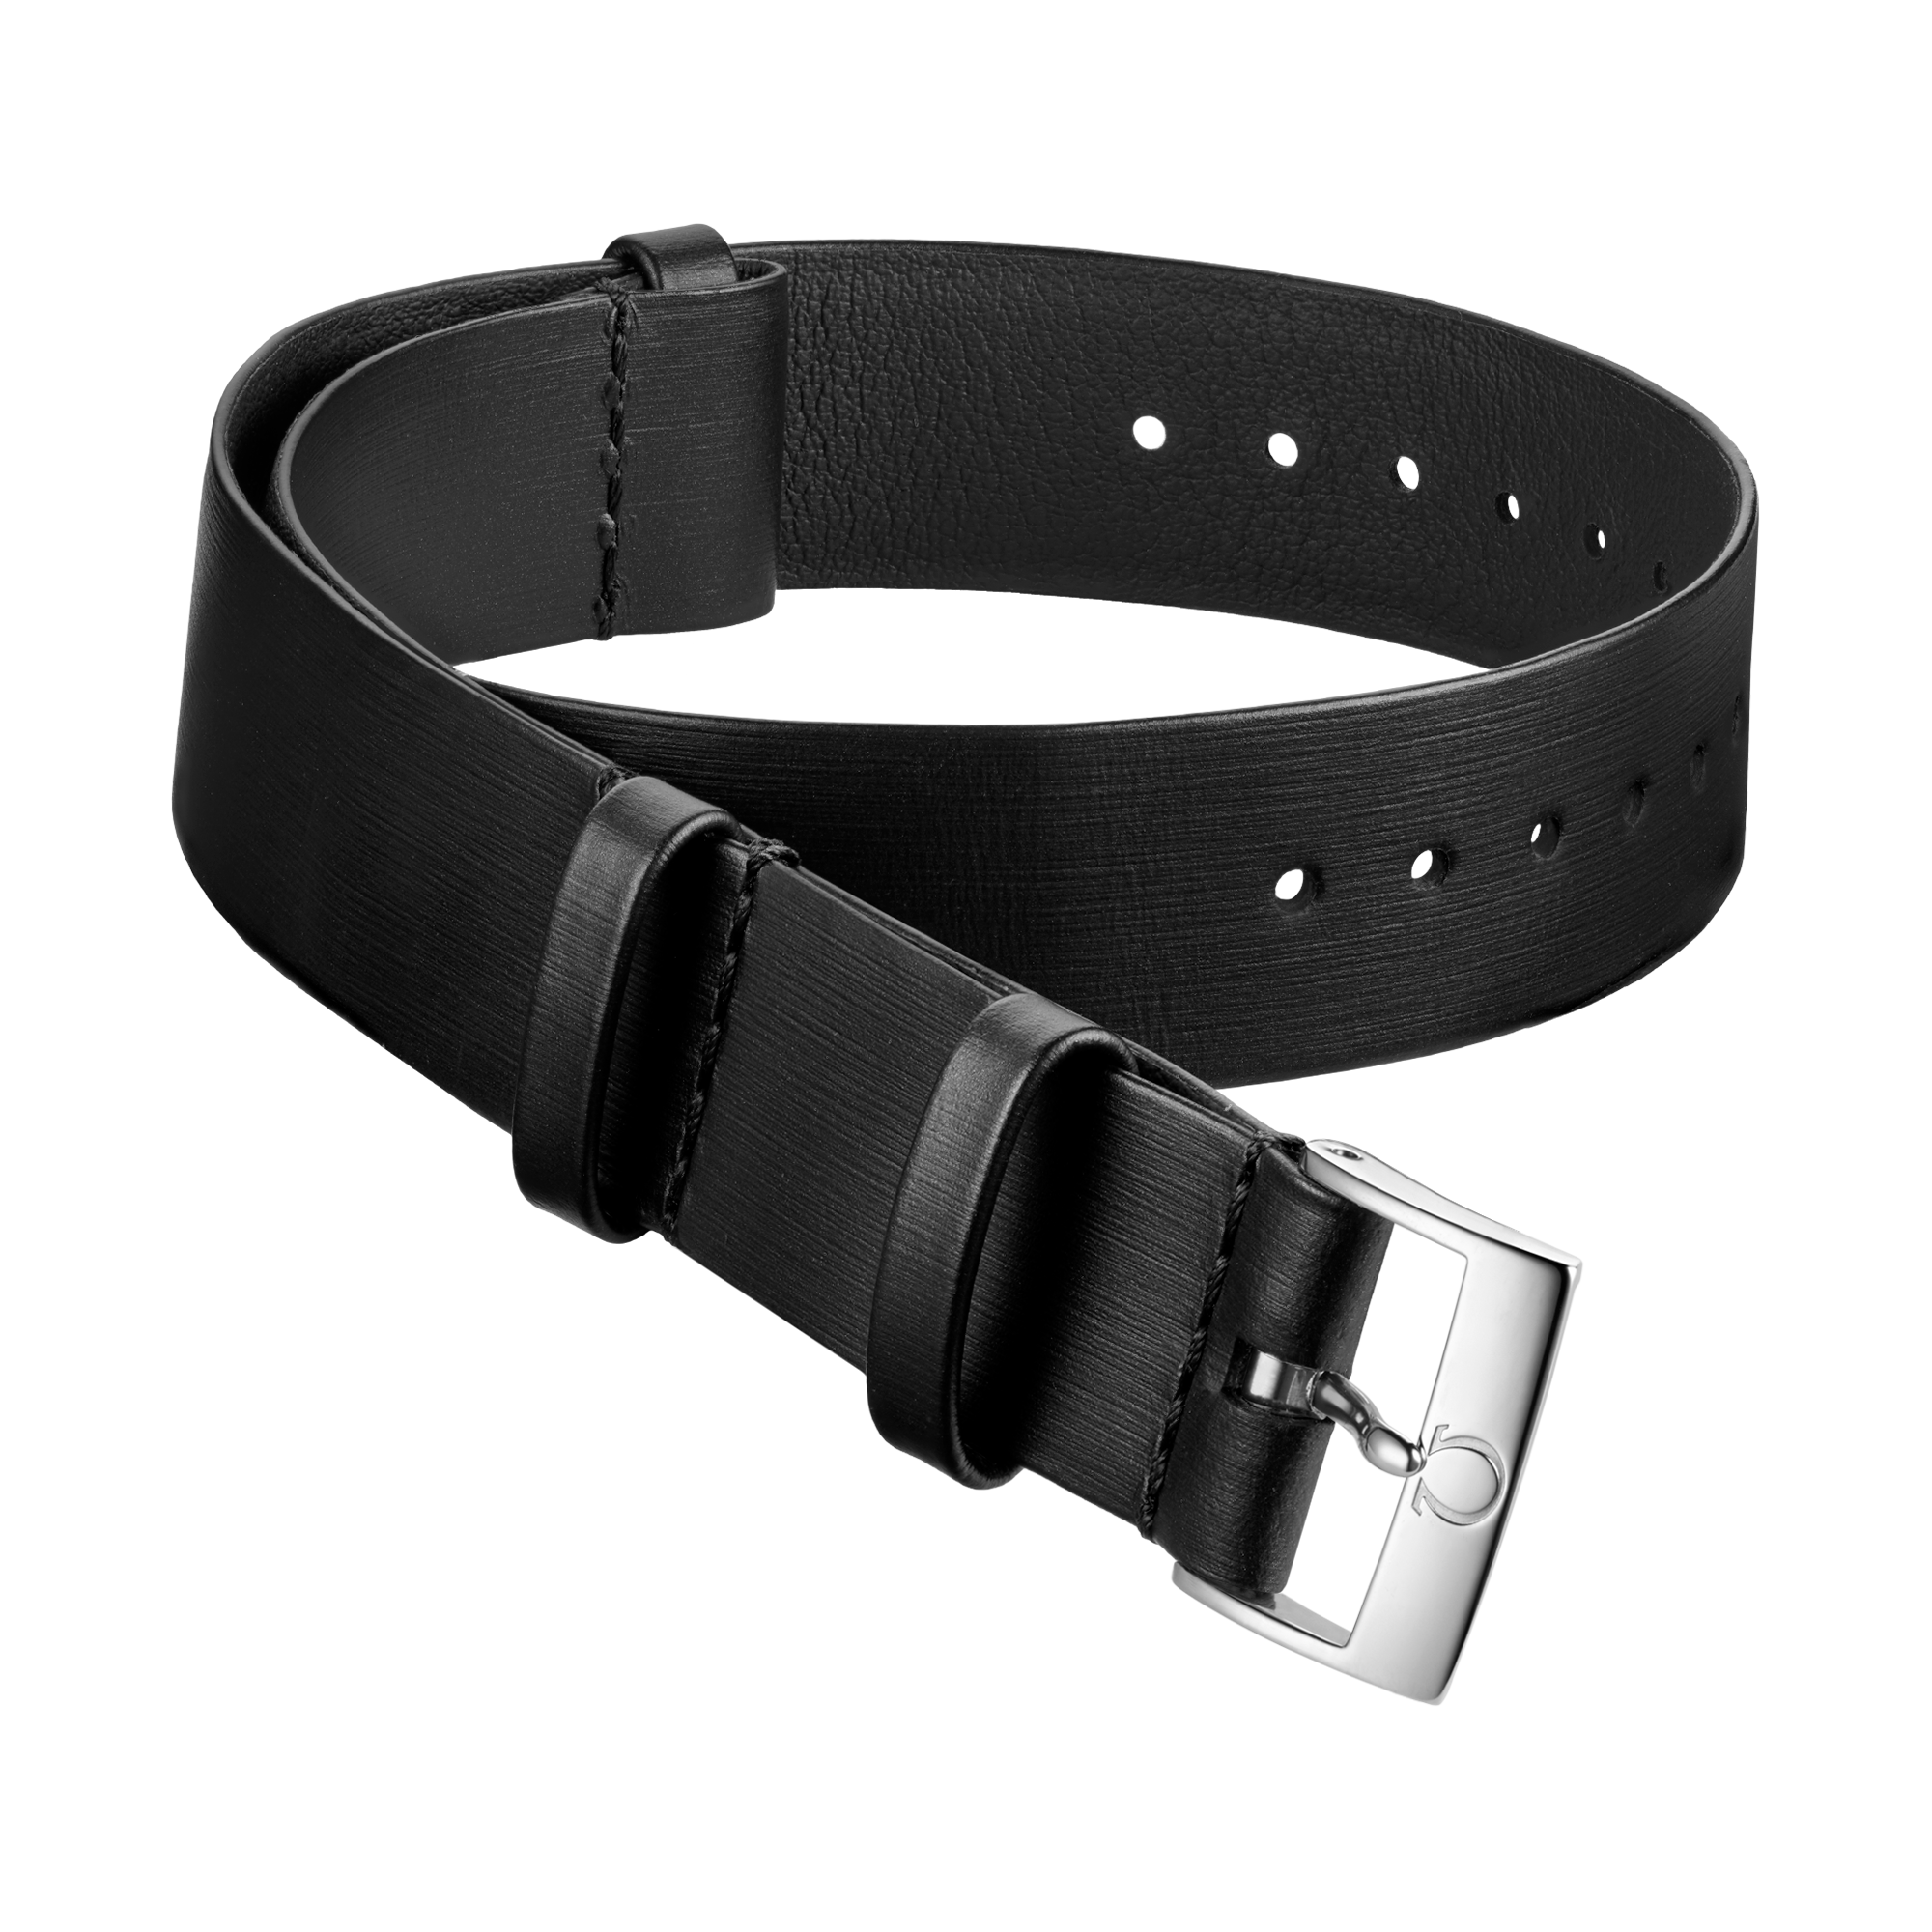 NATO strap - Black leather strap with satin brushed effect - 031CUZ011417w